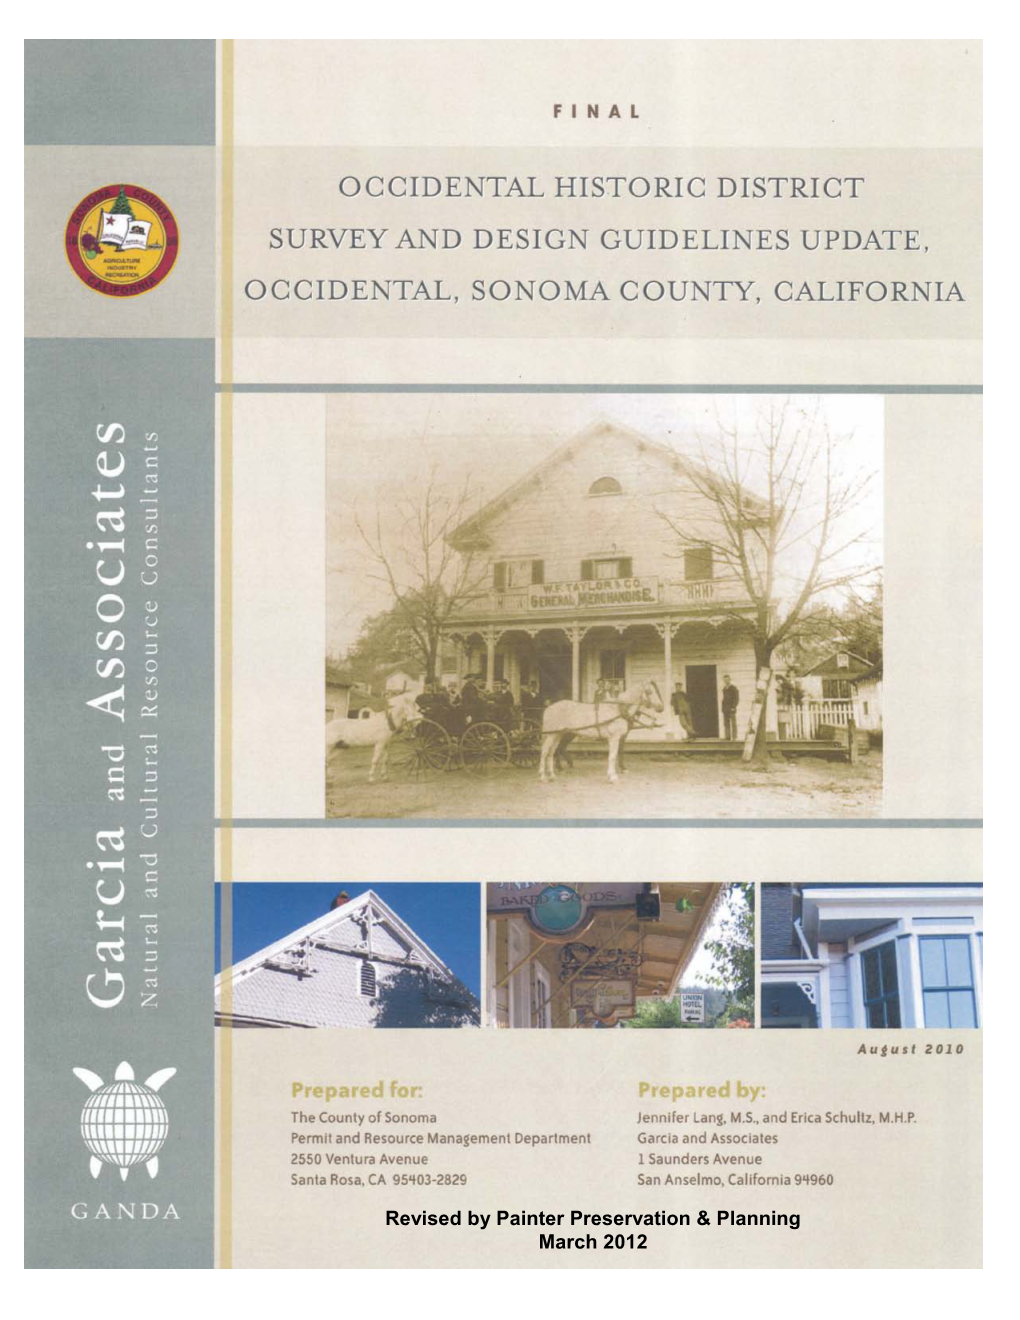 Occidental Historic District Survey and Design Guidelines Update Includes the Following Components